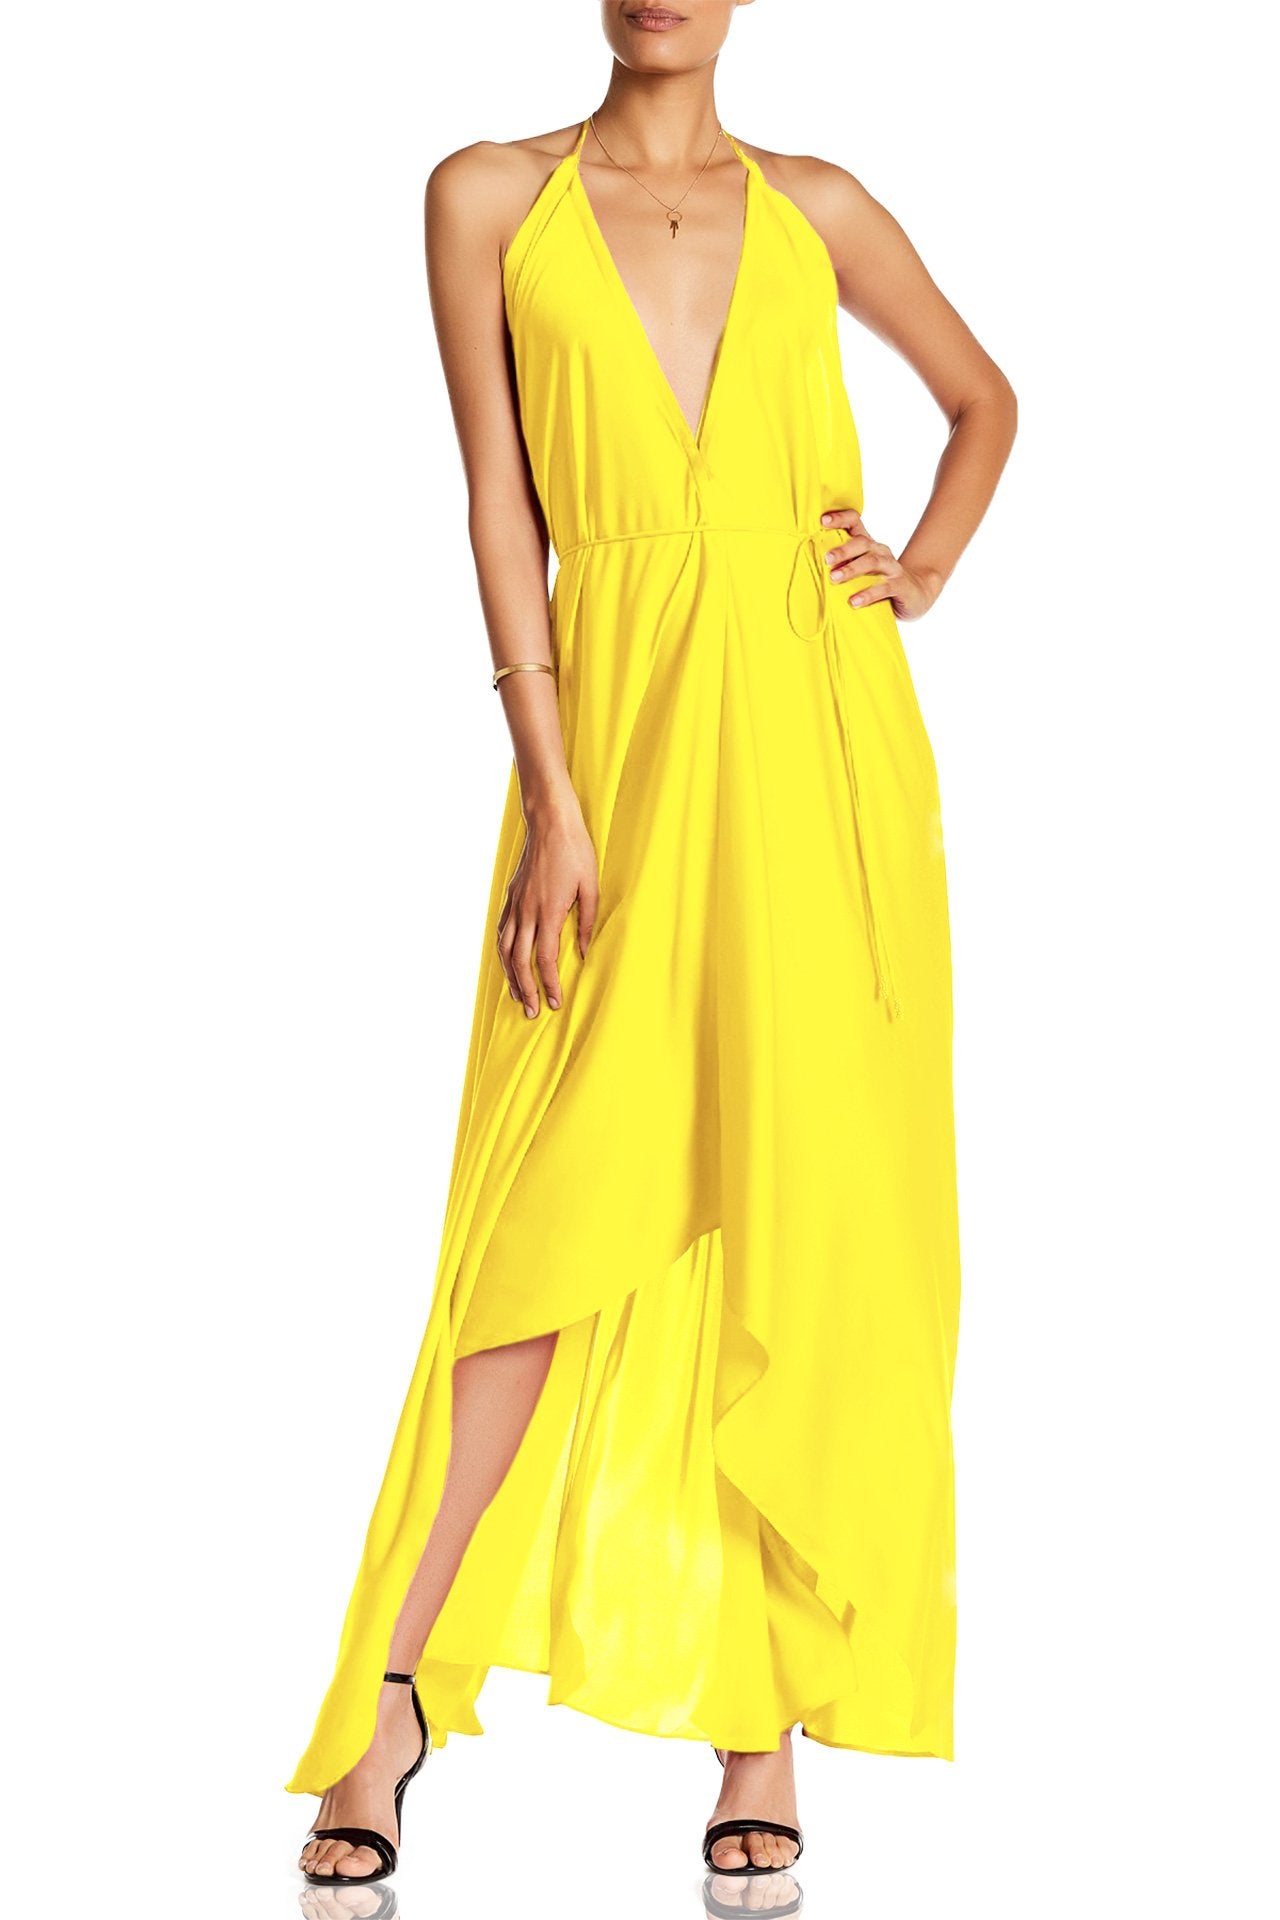 Solid-Yellow-Maxi-Dress-3-Ways-To-Wear